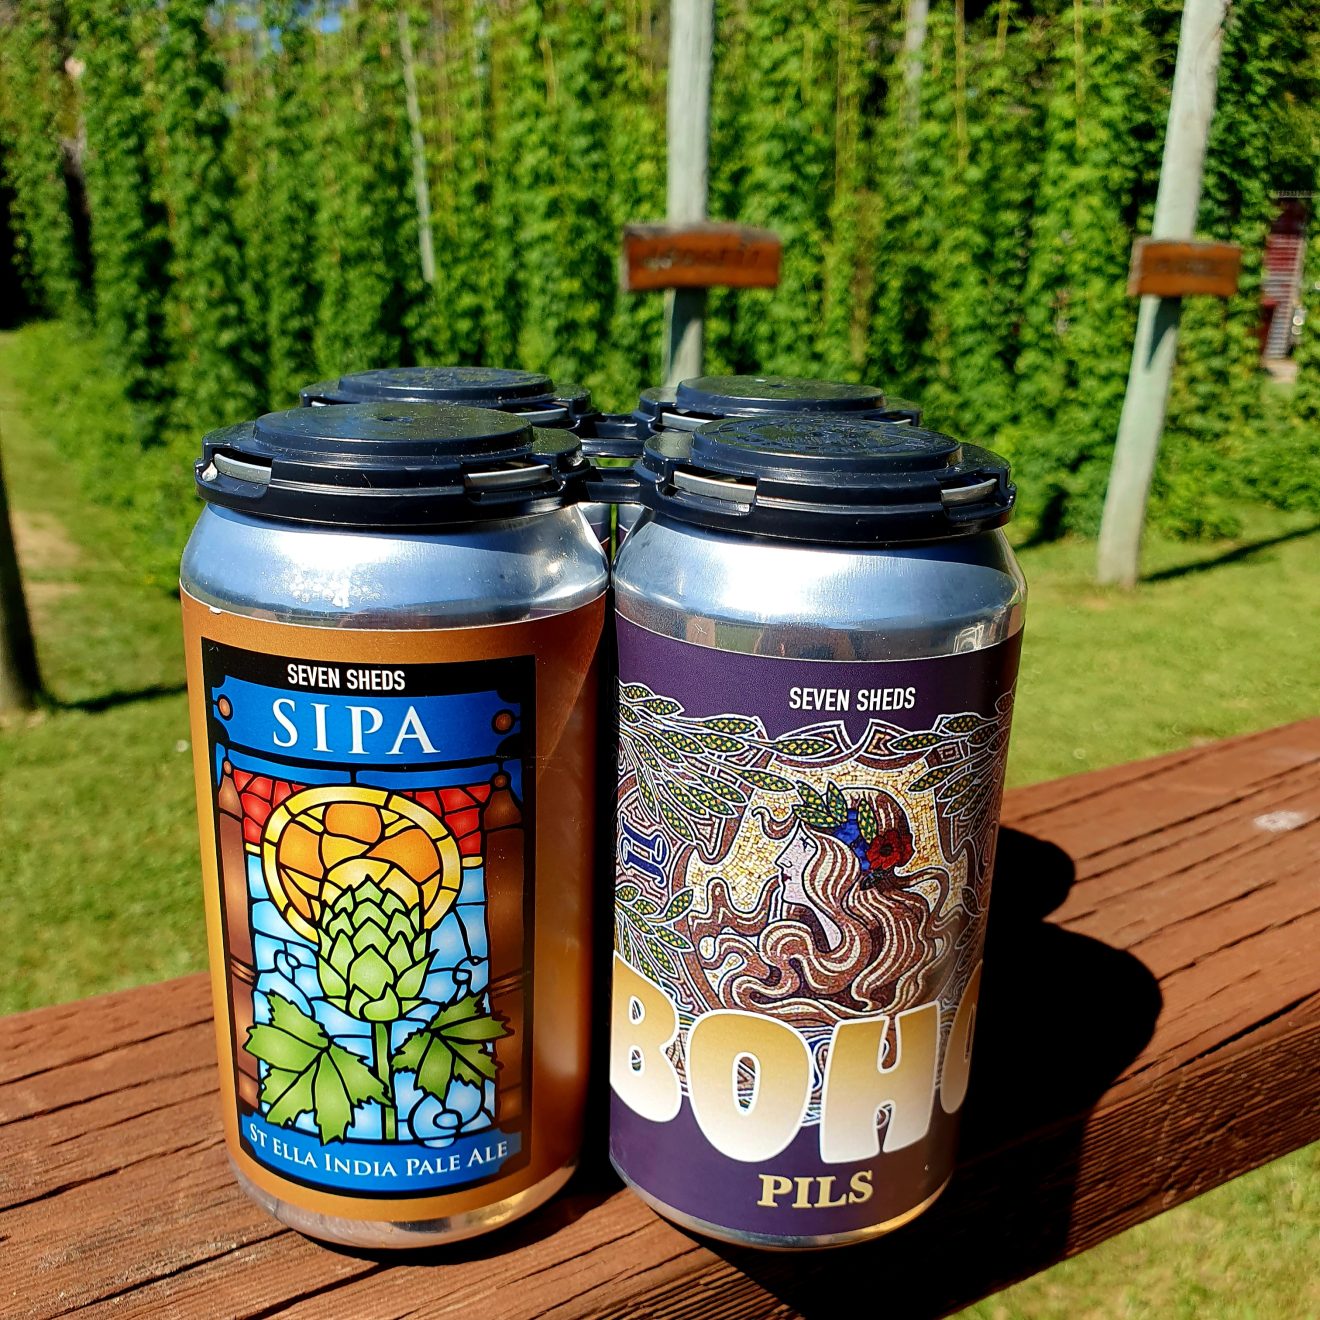 Seven Sheds St Ella India Pale Ale and Boho Pils cans in the foreground, Seven Sheds hop garden in the background.